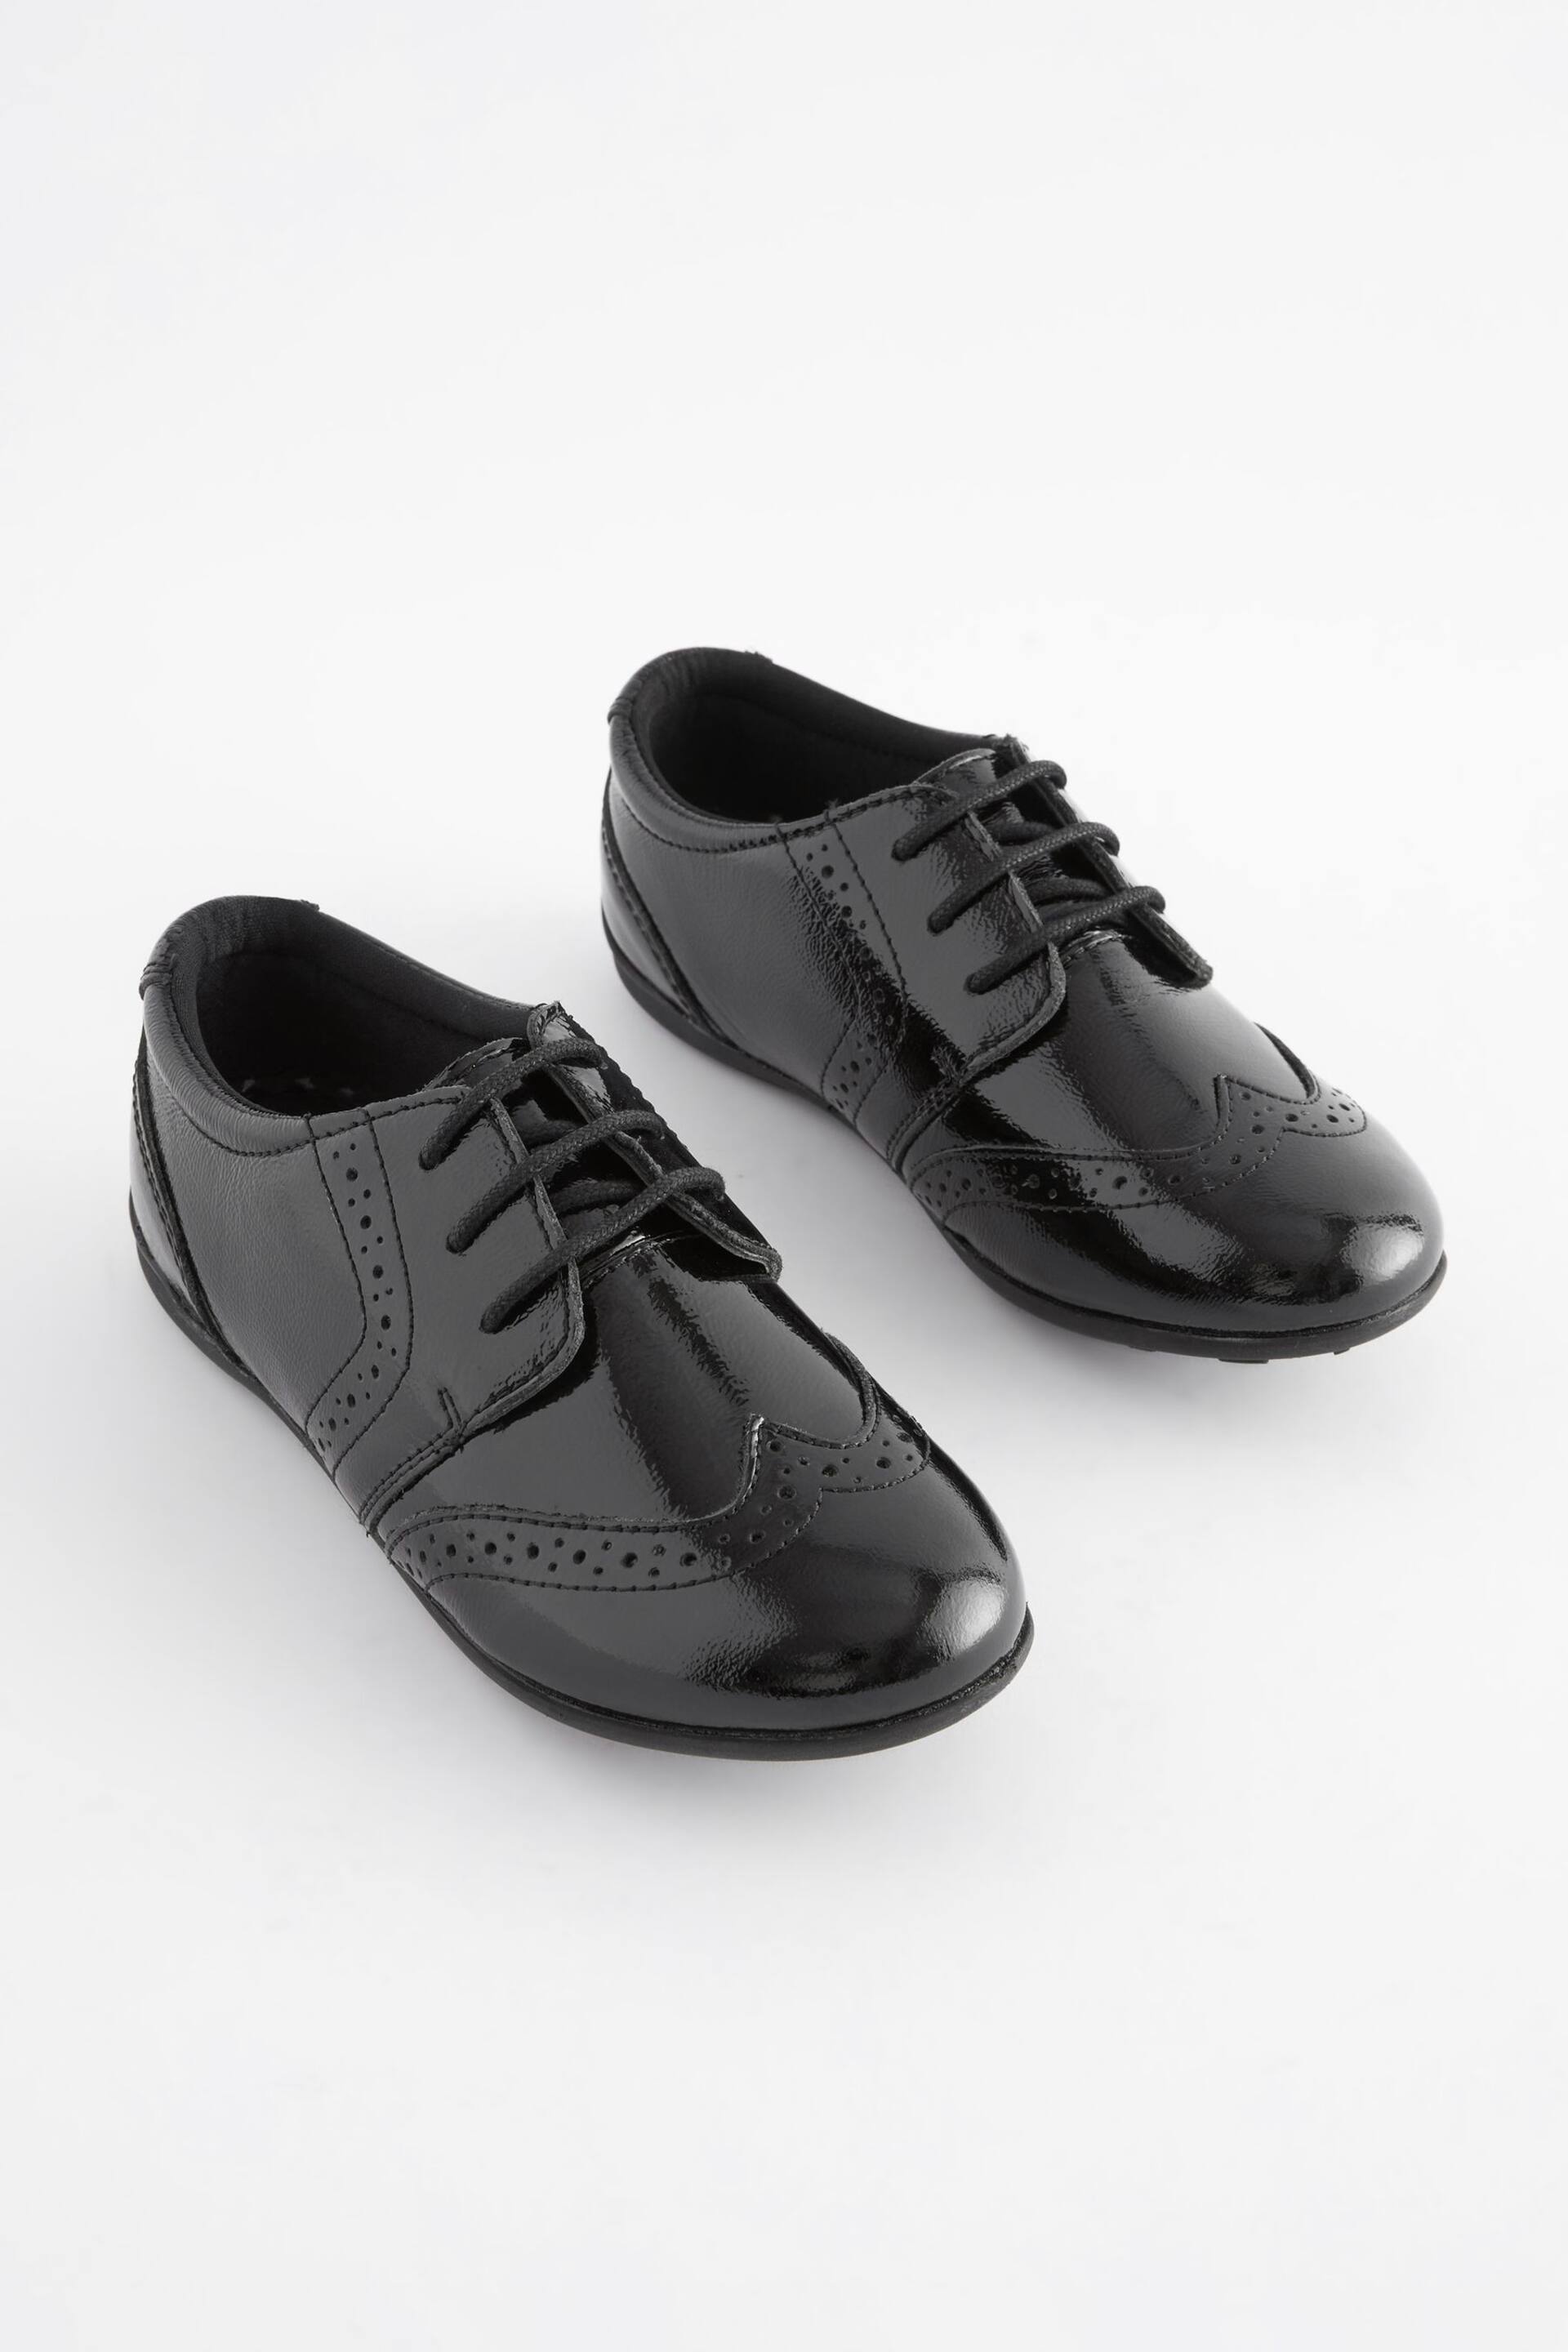 Black Patent Wide Fit (G) School Leather Lace-Up Brogues - Image 1 of 9